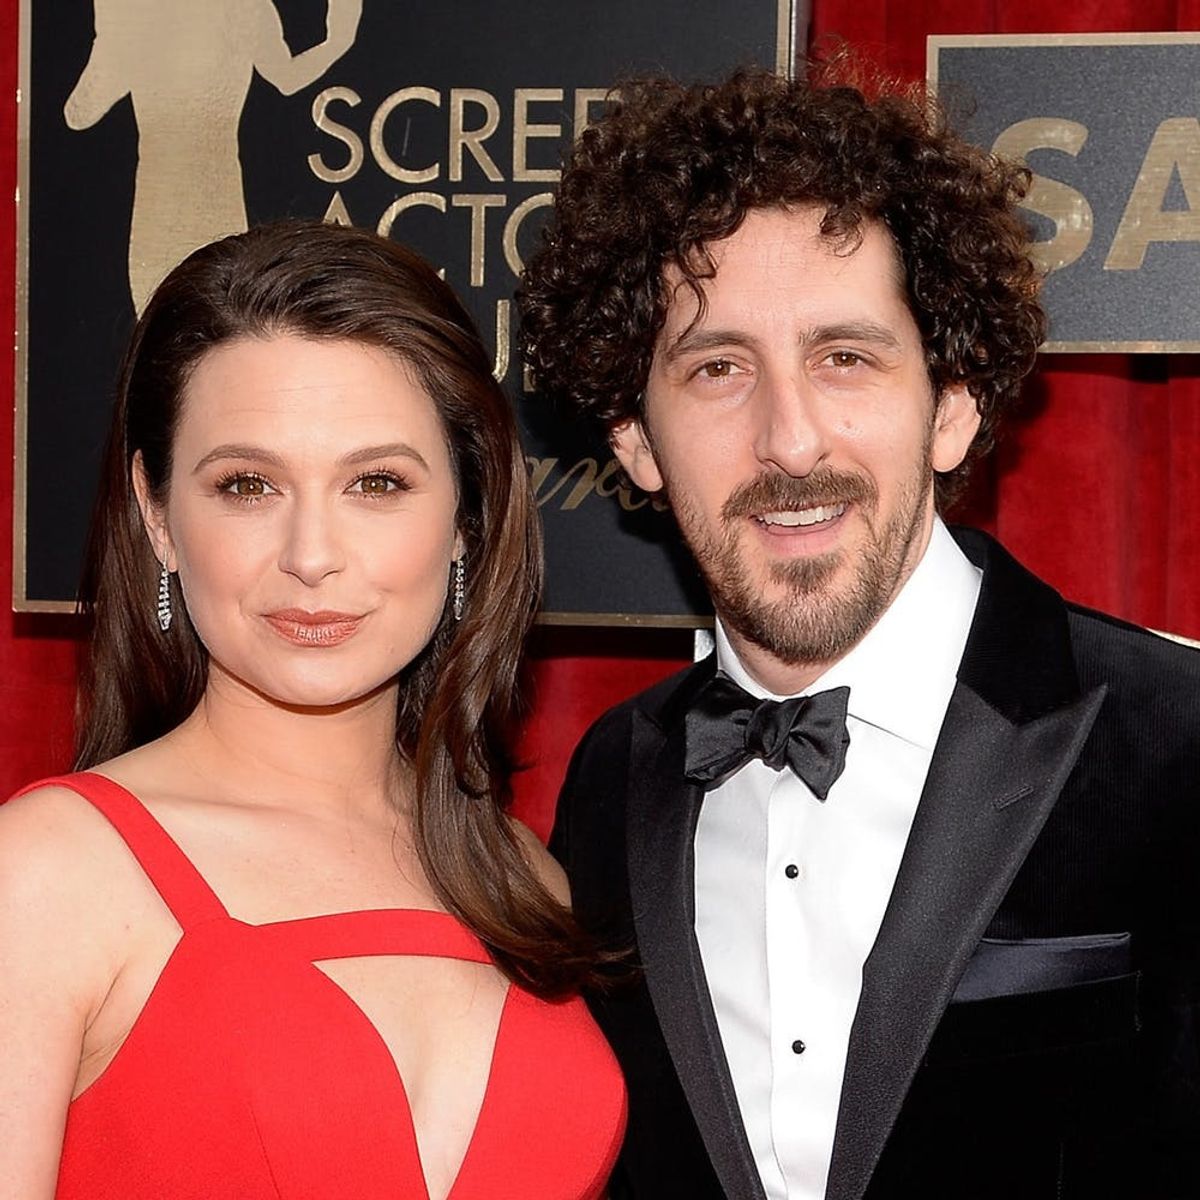 “Scandal” Star Katie Lowes Welcomes a Baby Boy and Shares His Adorable Name